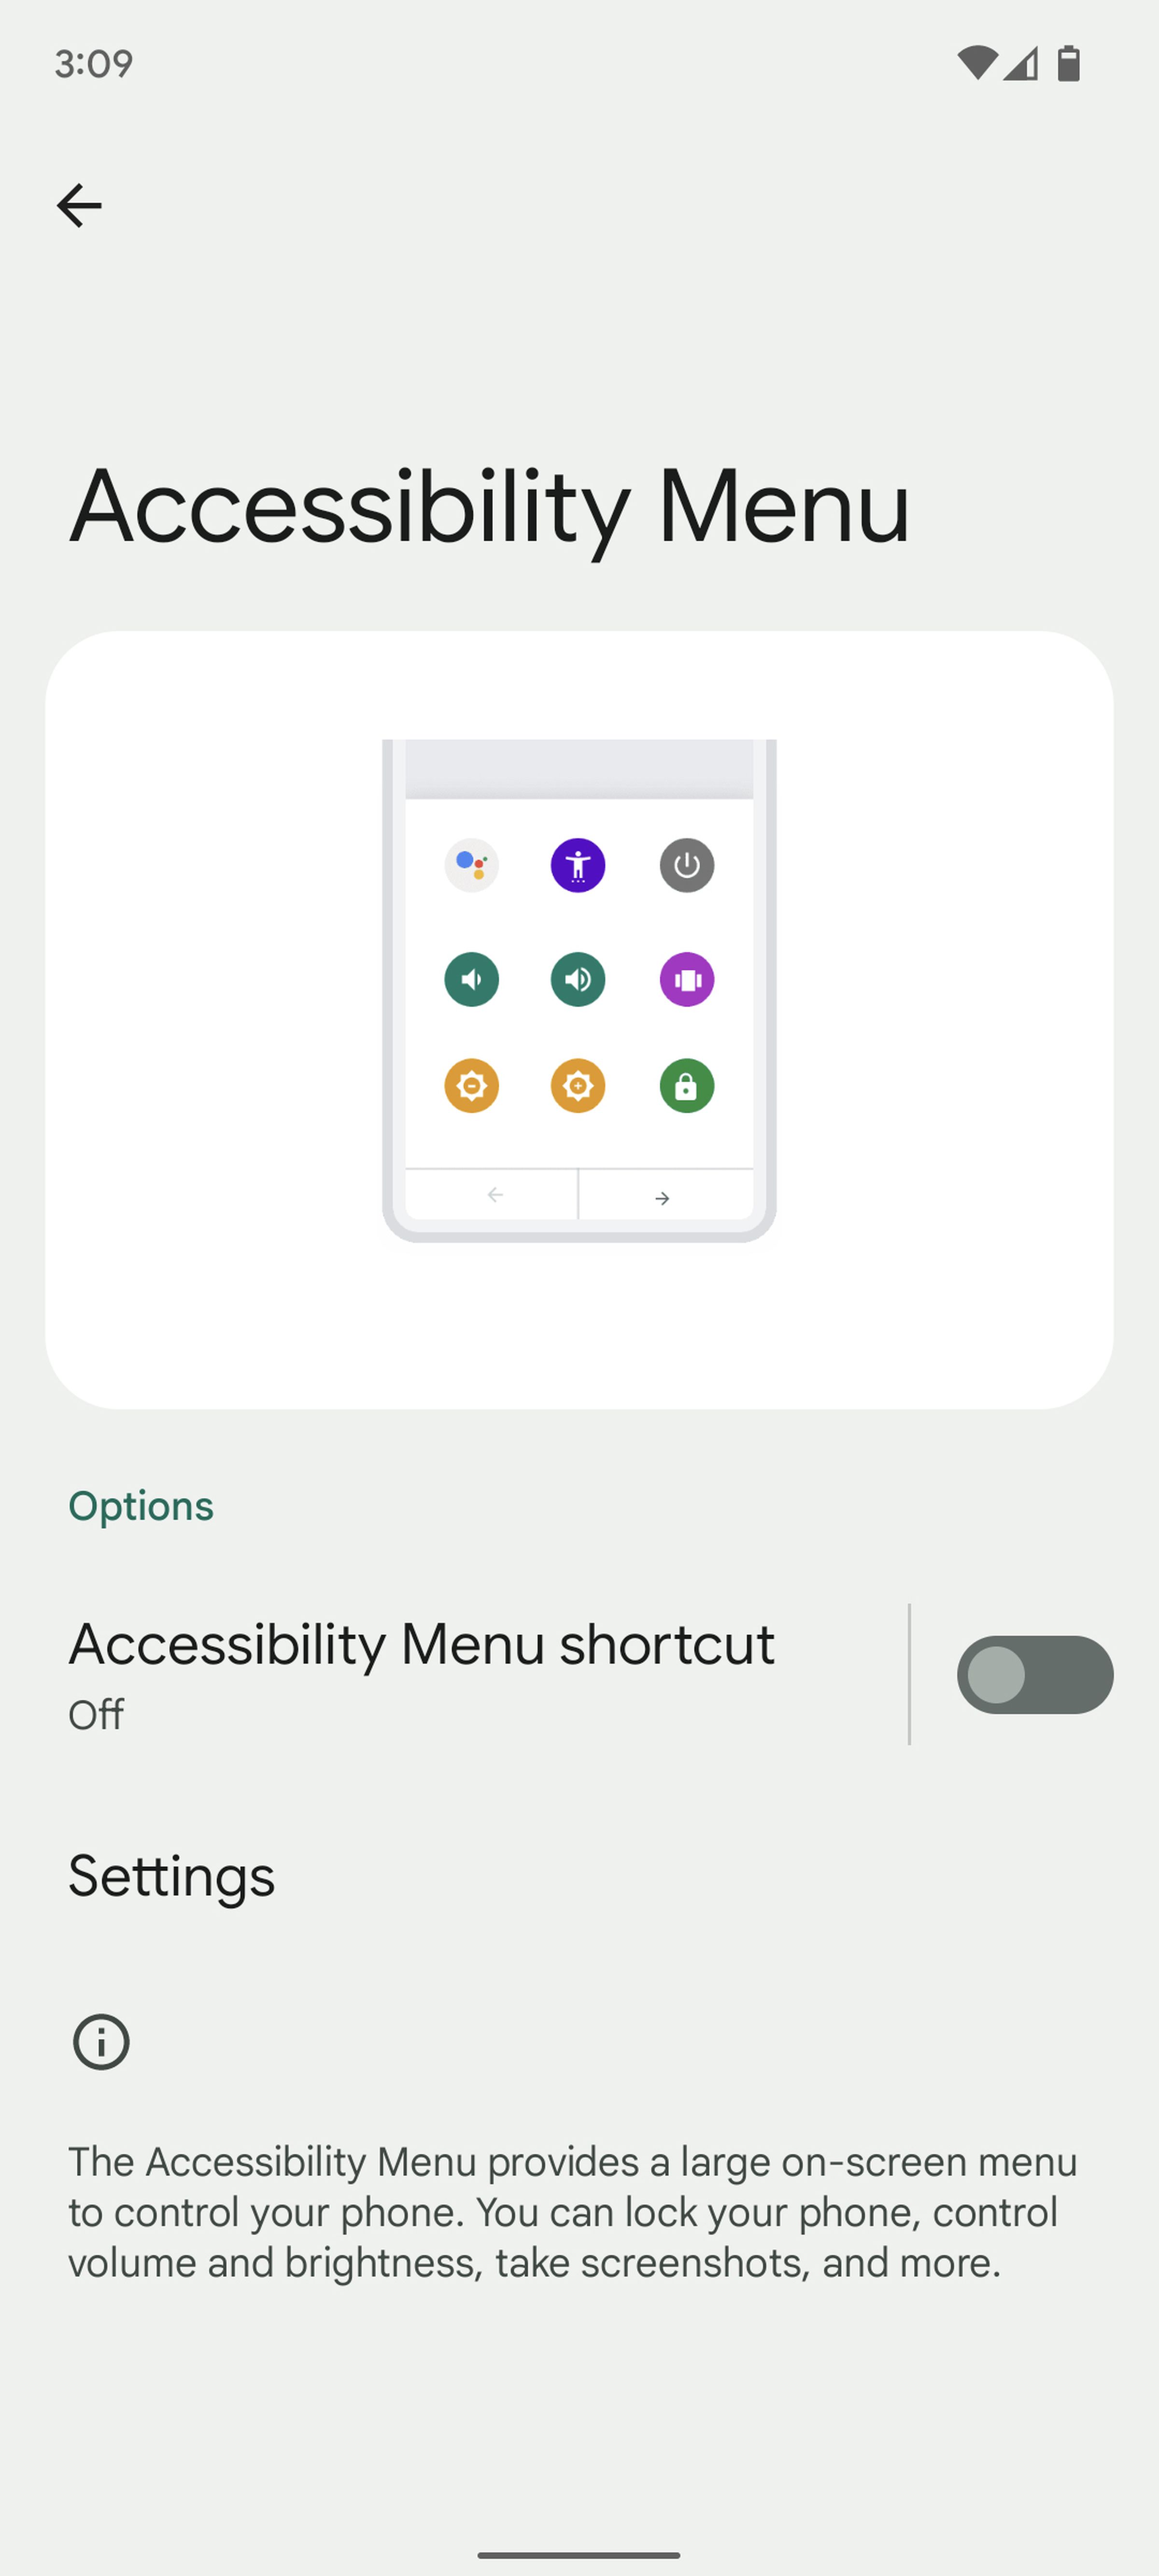 Accessibility menu page with shortcut toggle